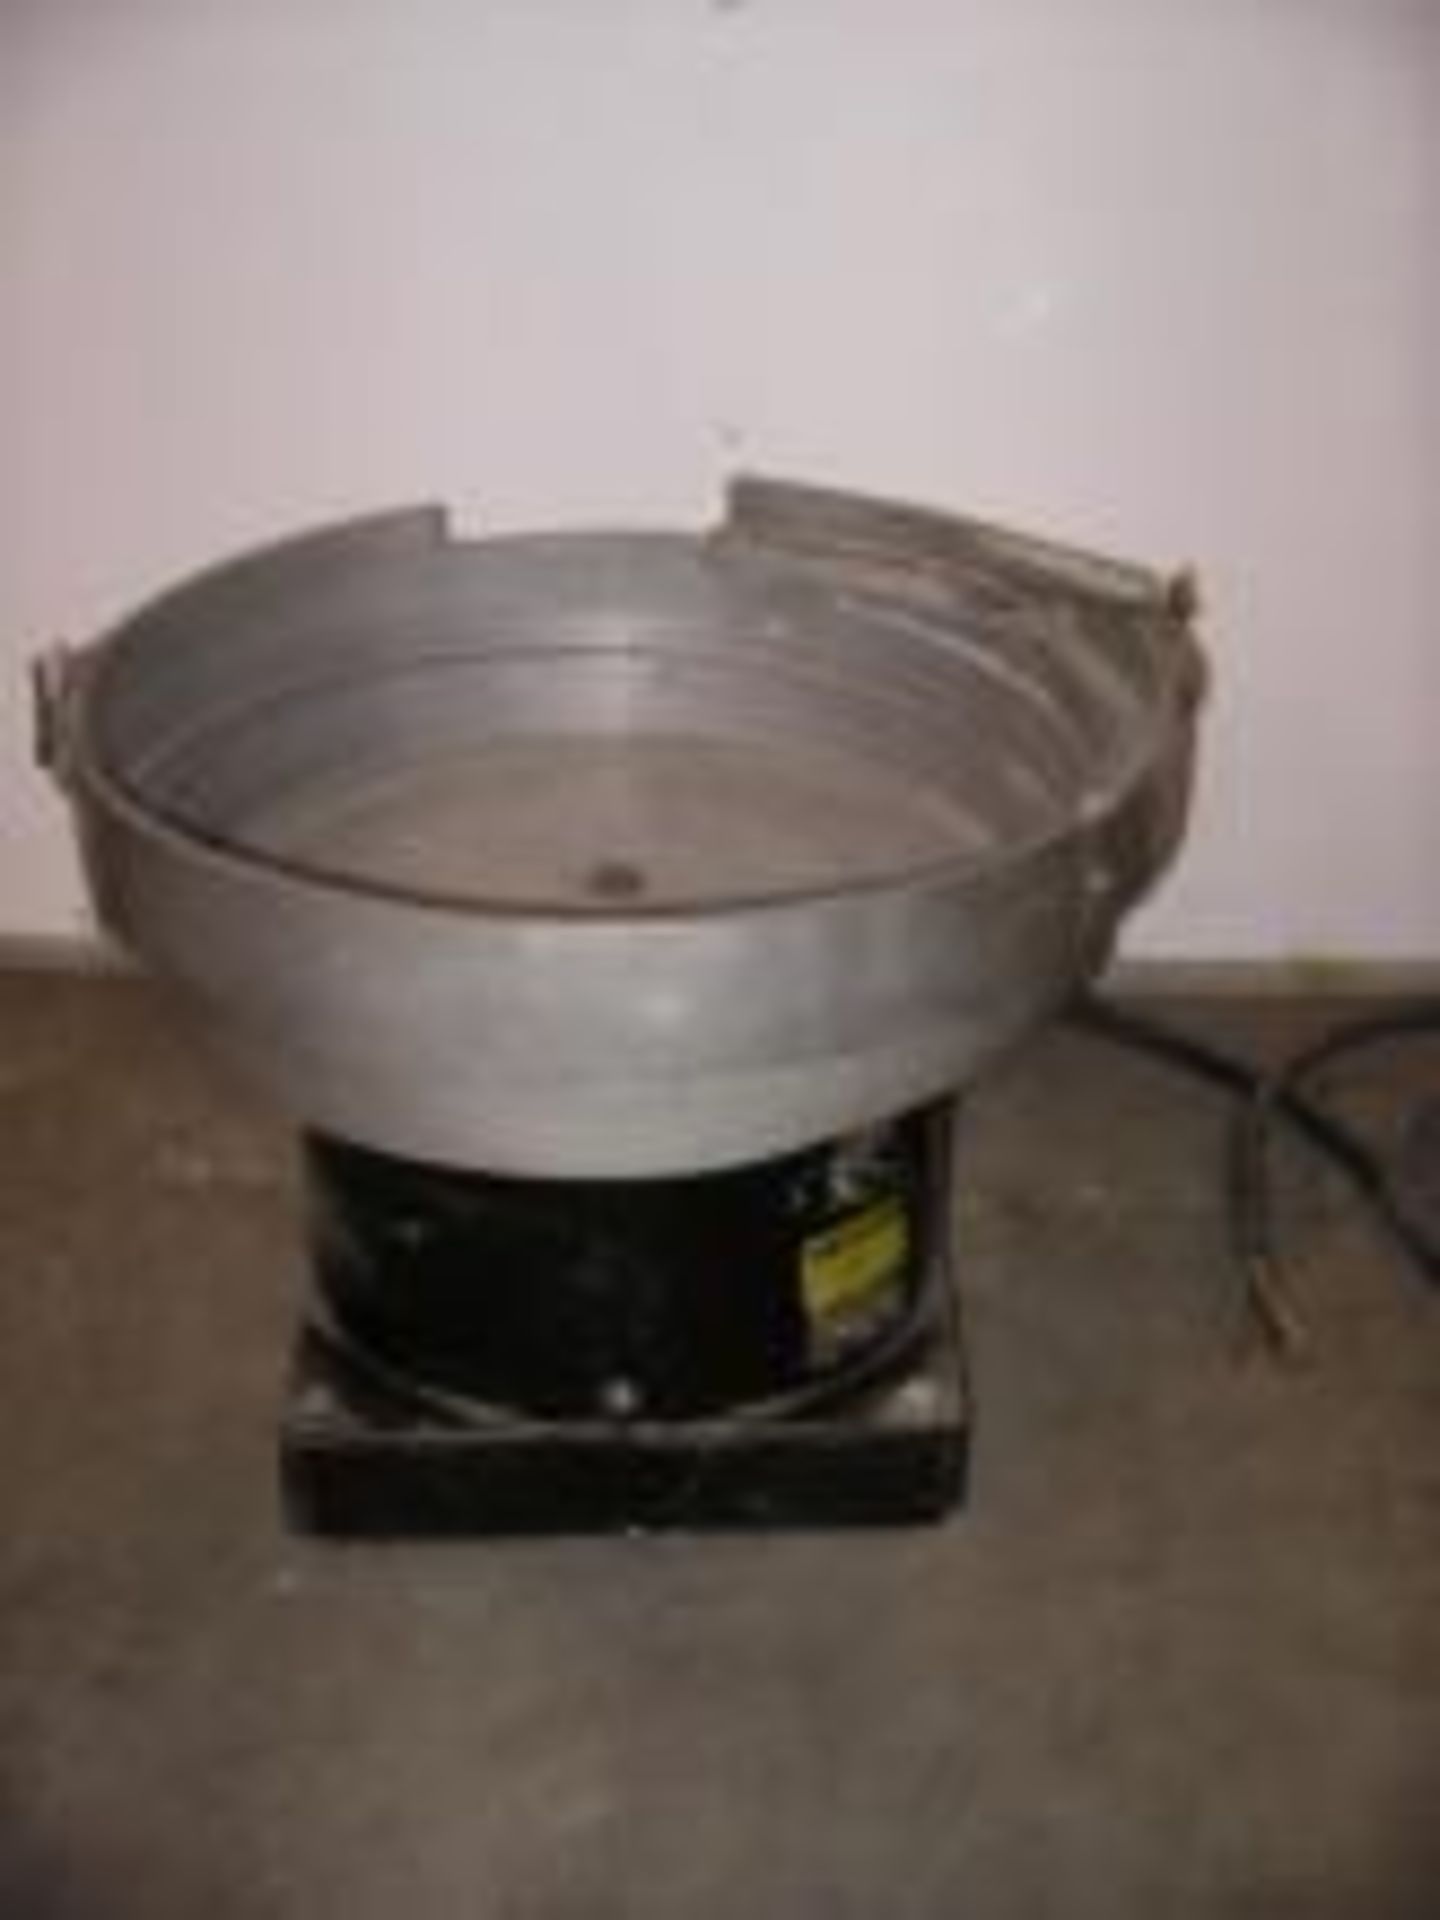 Used 22" Diameter Precision Feeders Vibratory Parts Feeder. Electrics: 120 volts. Load Out Fee:75